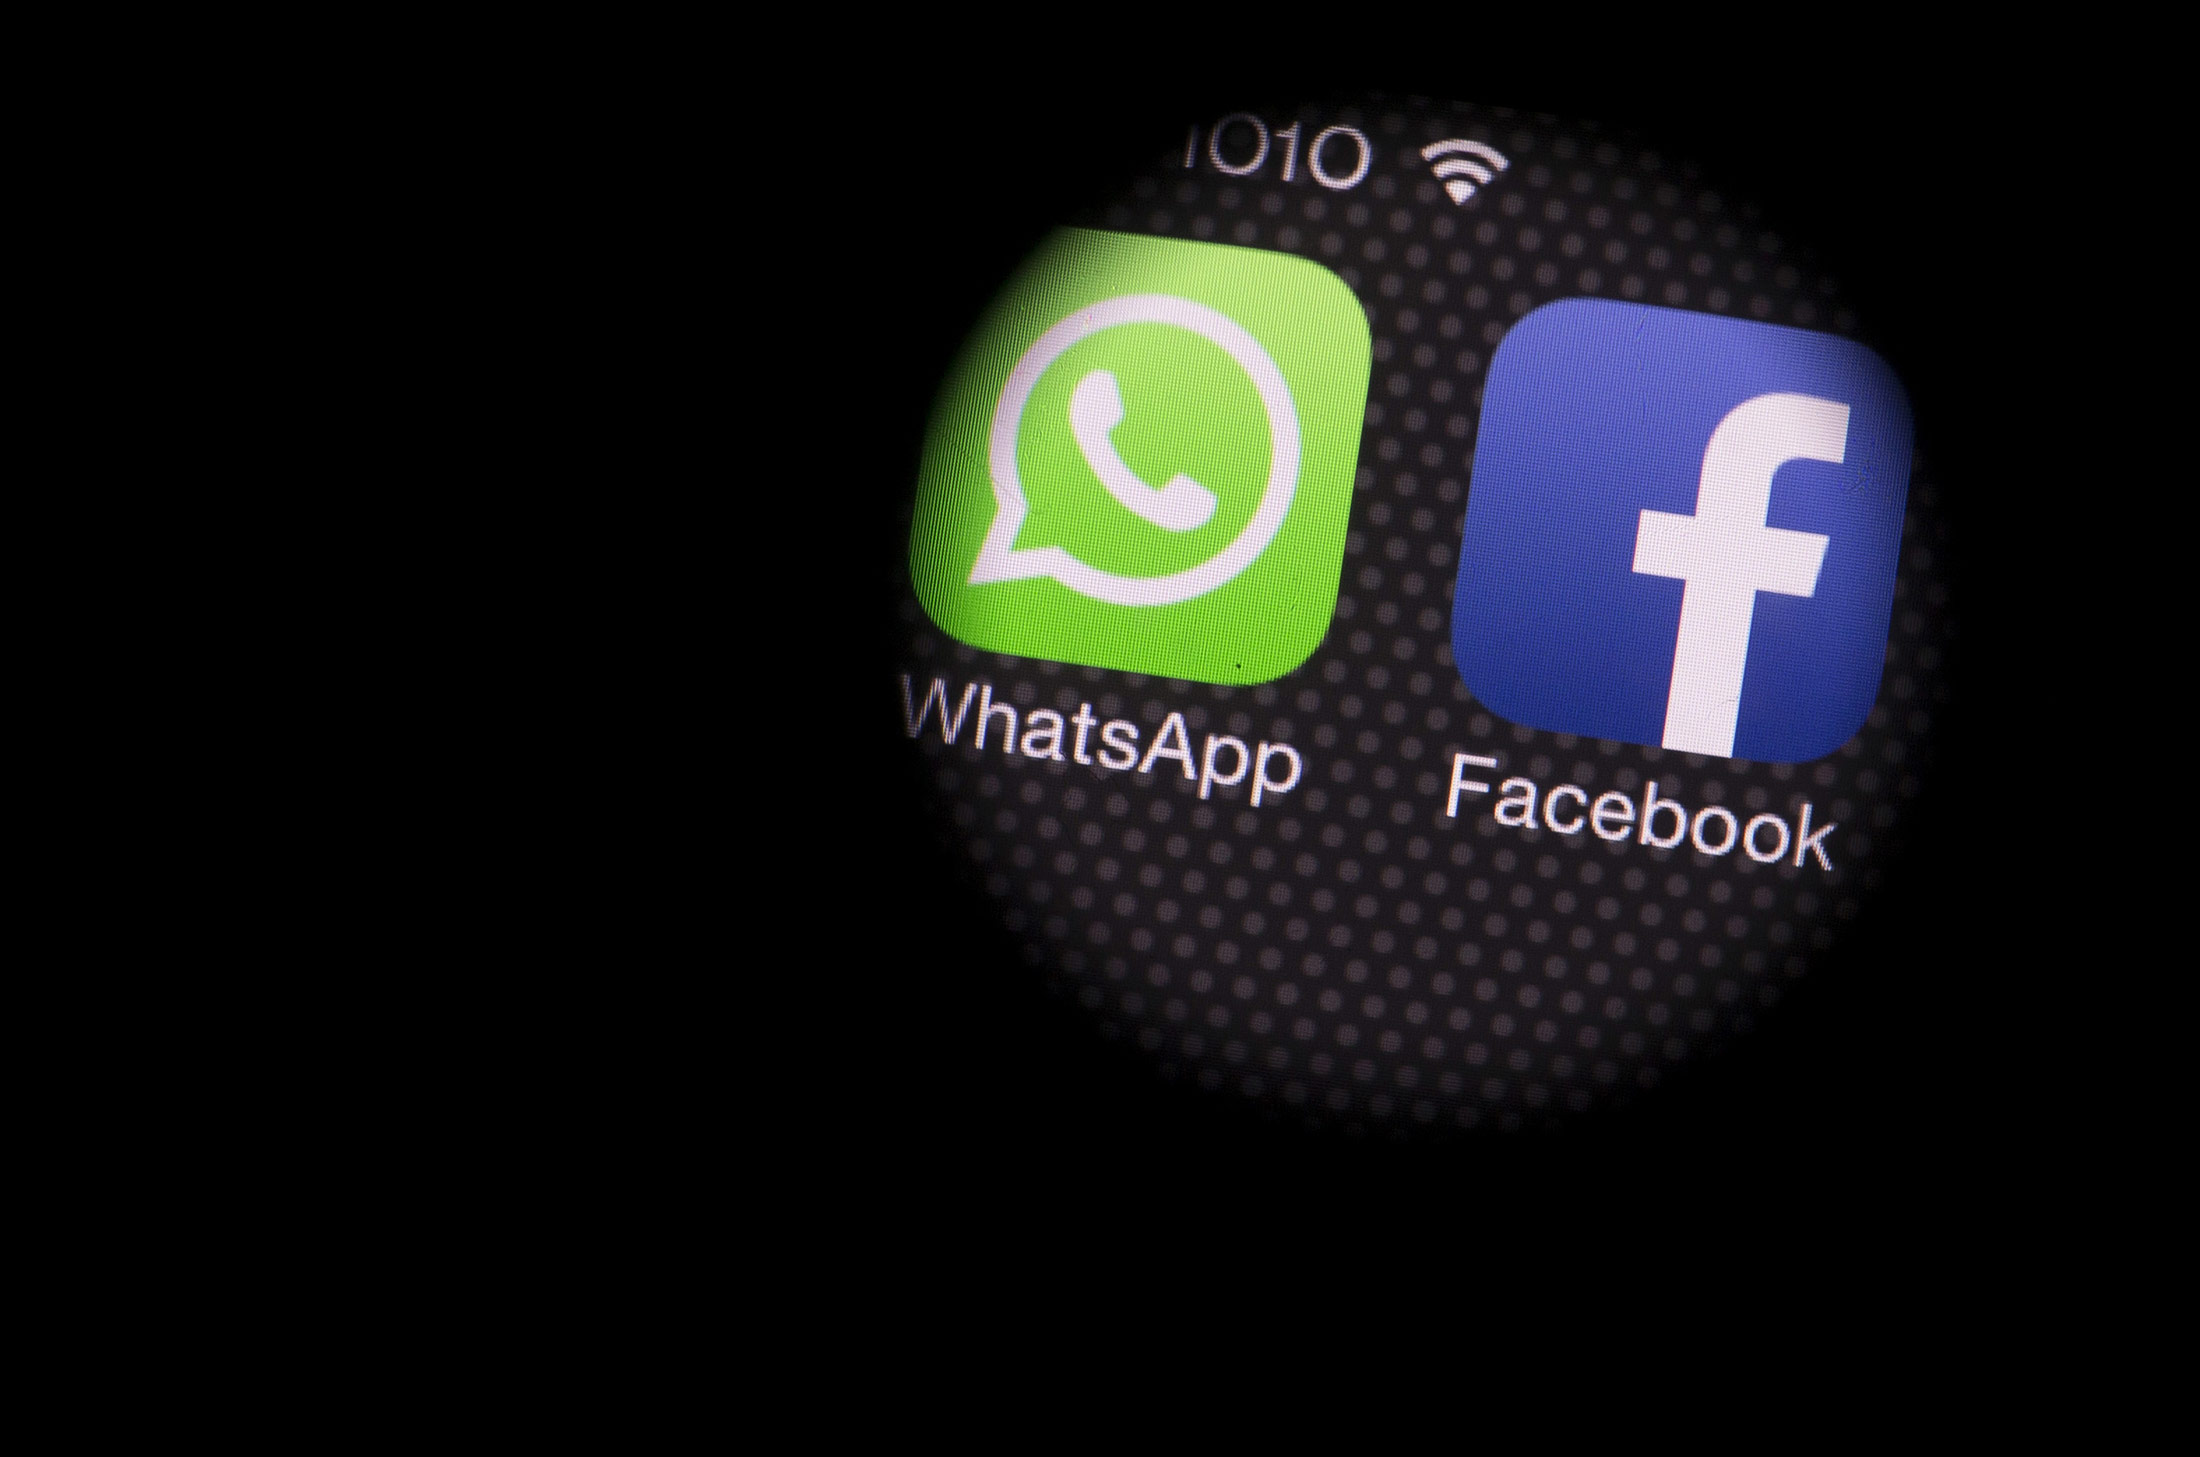 Facebook Plans for WhatsApp Stumble on EU Privacy Concerns